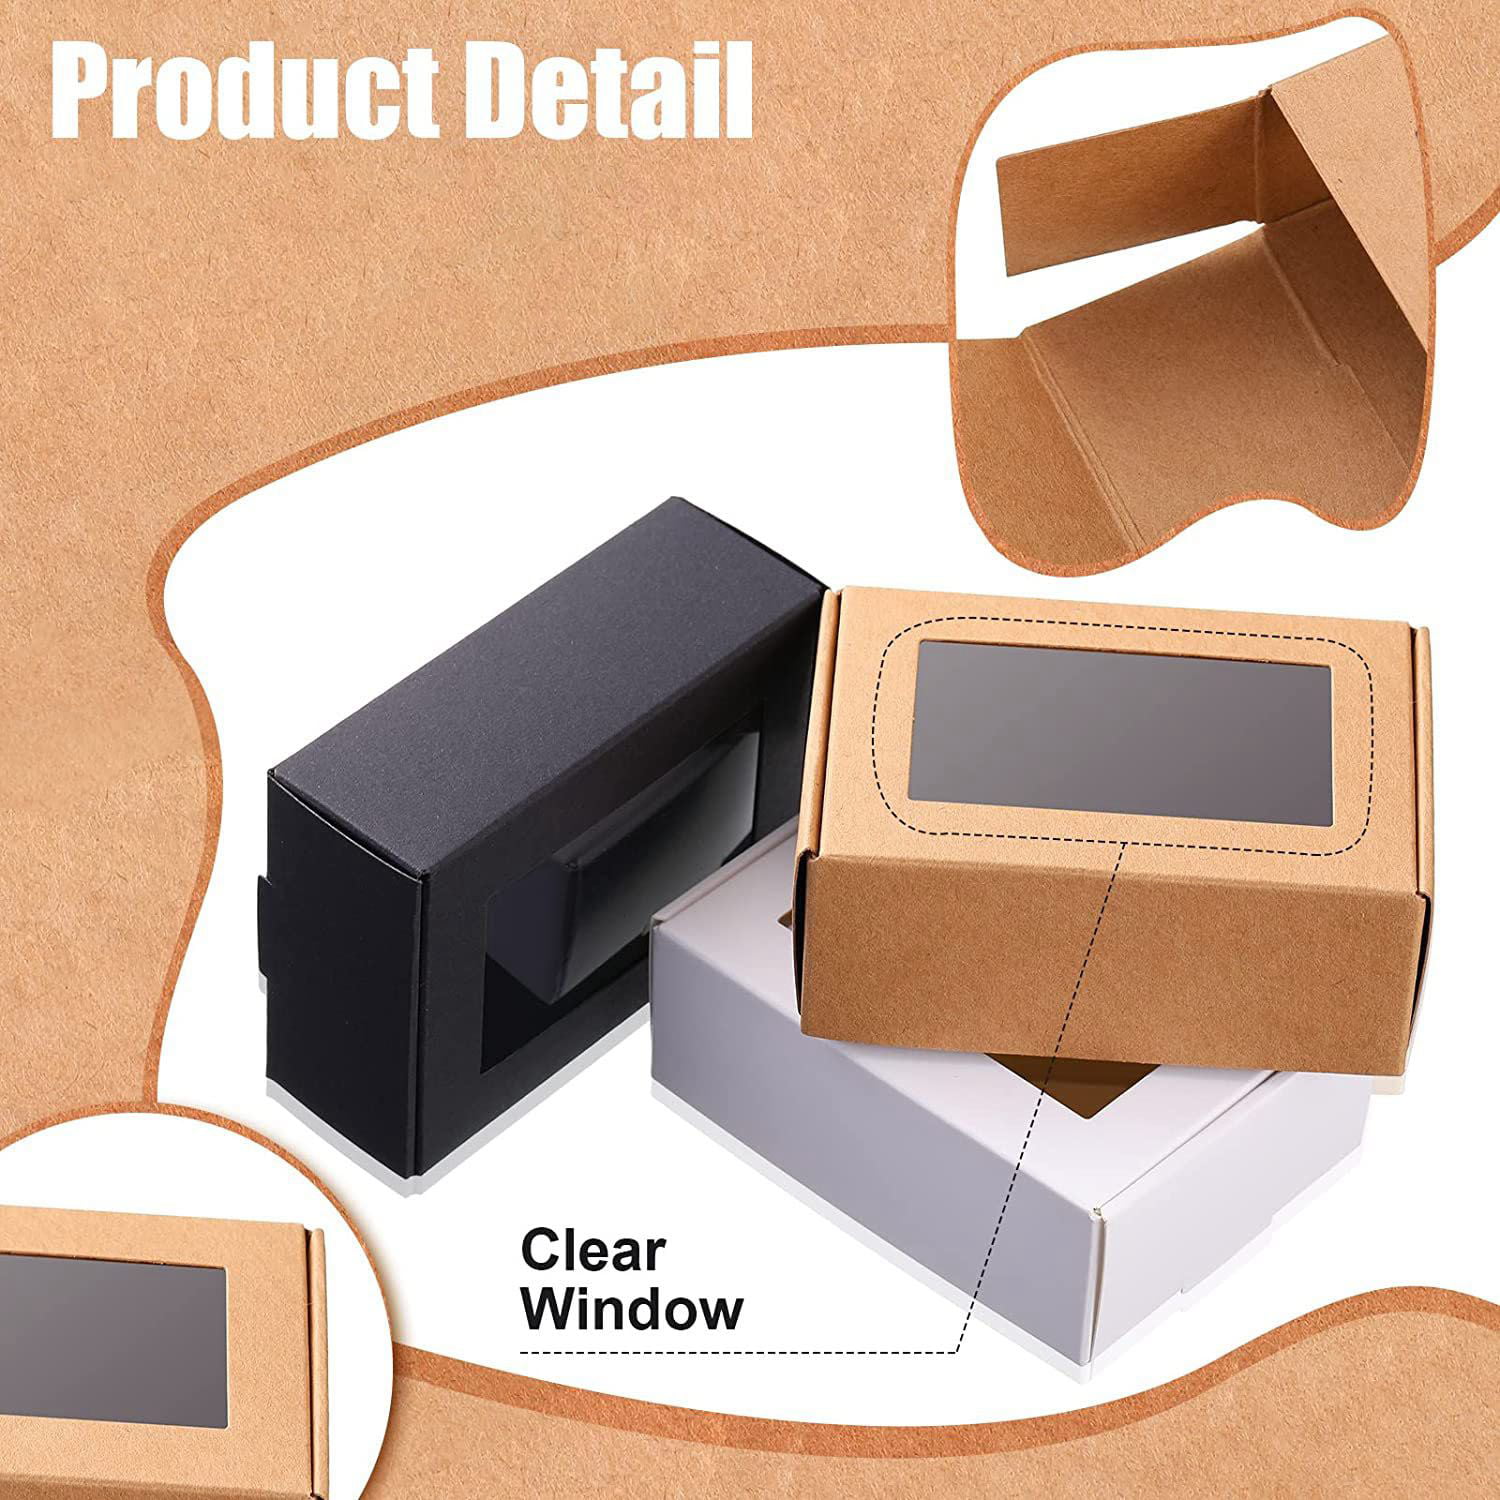 30 Pieces Mini Kraft Paper Box with Window Soap Packaging Boxes Present Packaging Box Treat Box for Homemade Soap Favor Treat Bakery Candy White,3.34 x 2.36 x 1.18 Inch 